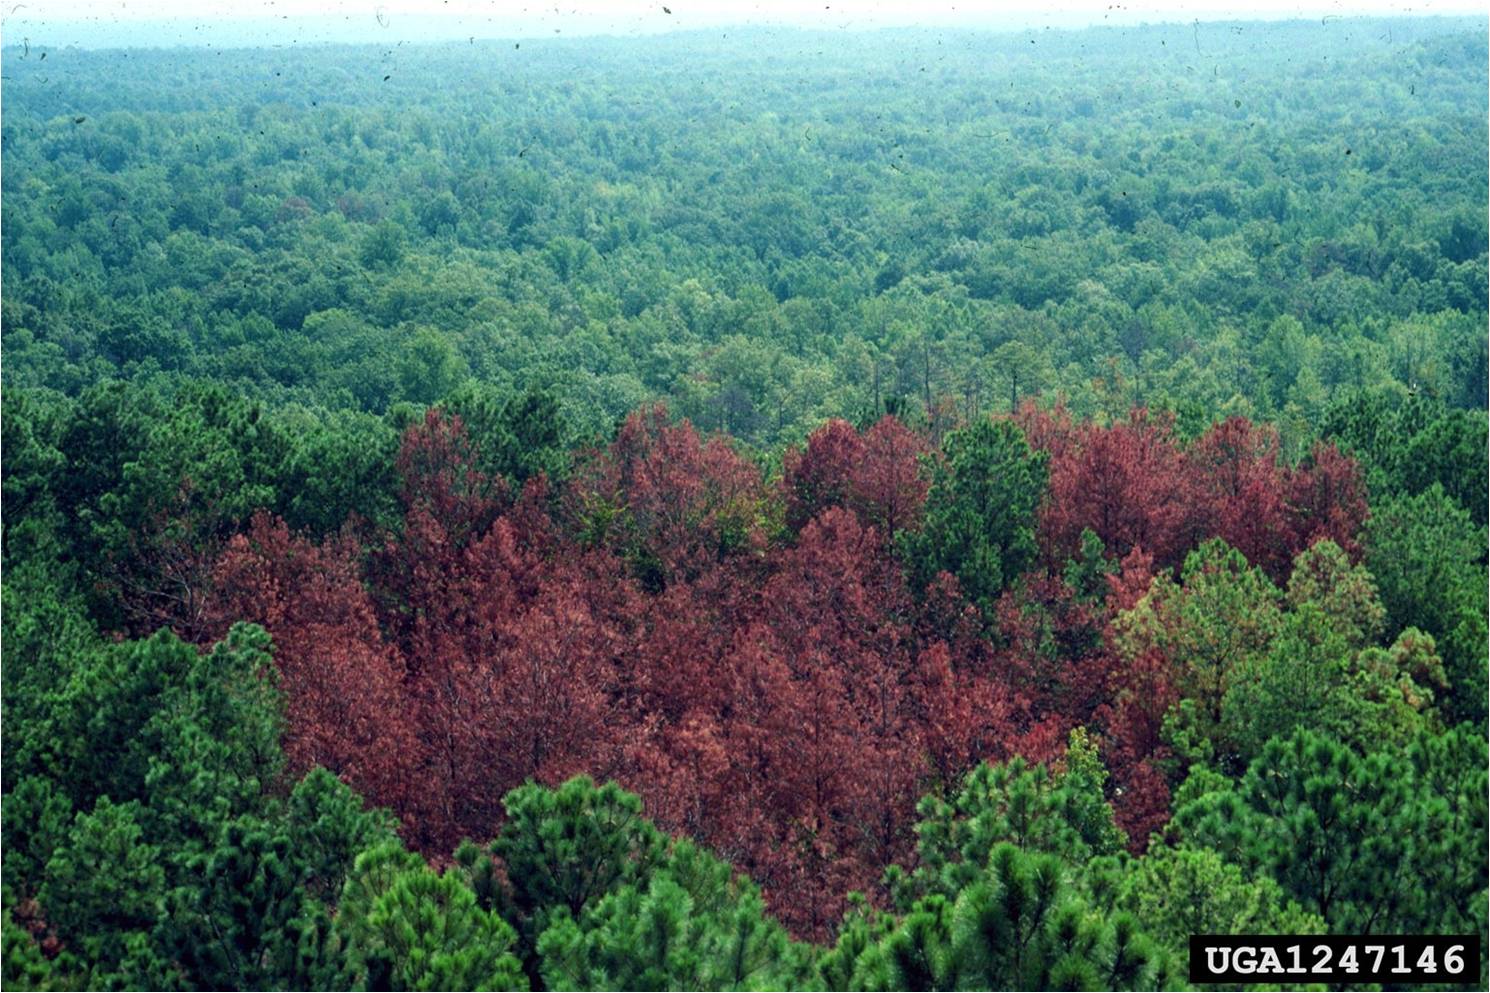 Photo of a dead area of pines from an aerial view